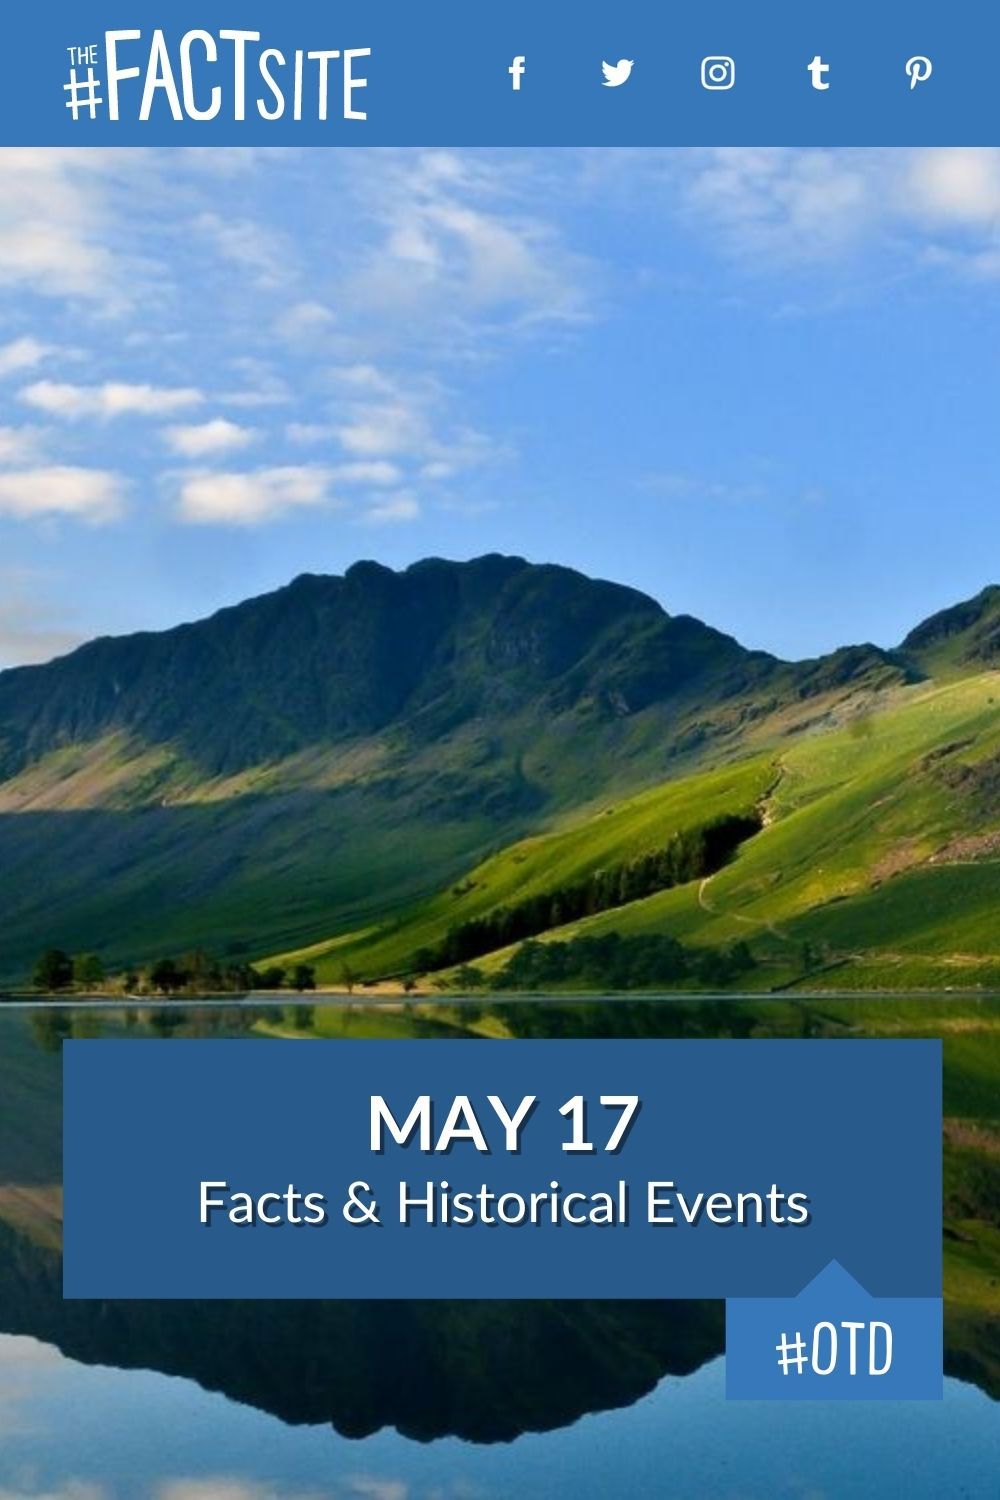 Facts & Historic Events That Happened on May 17